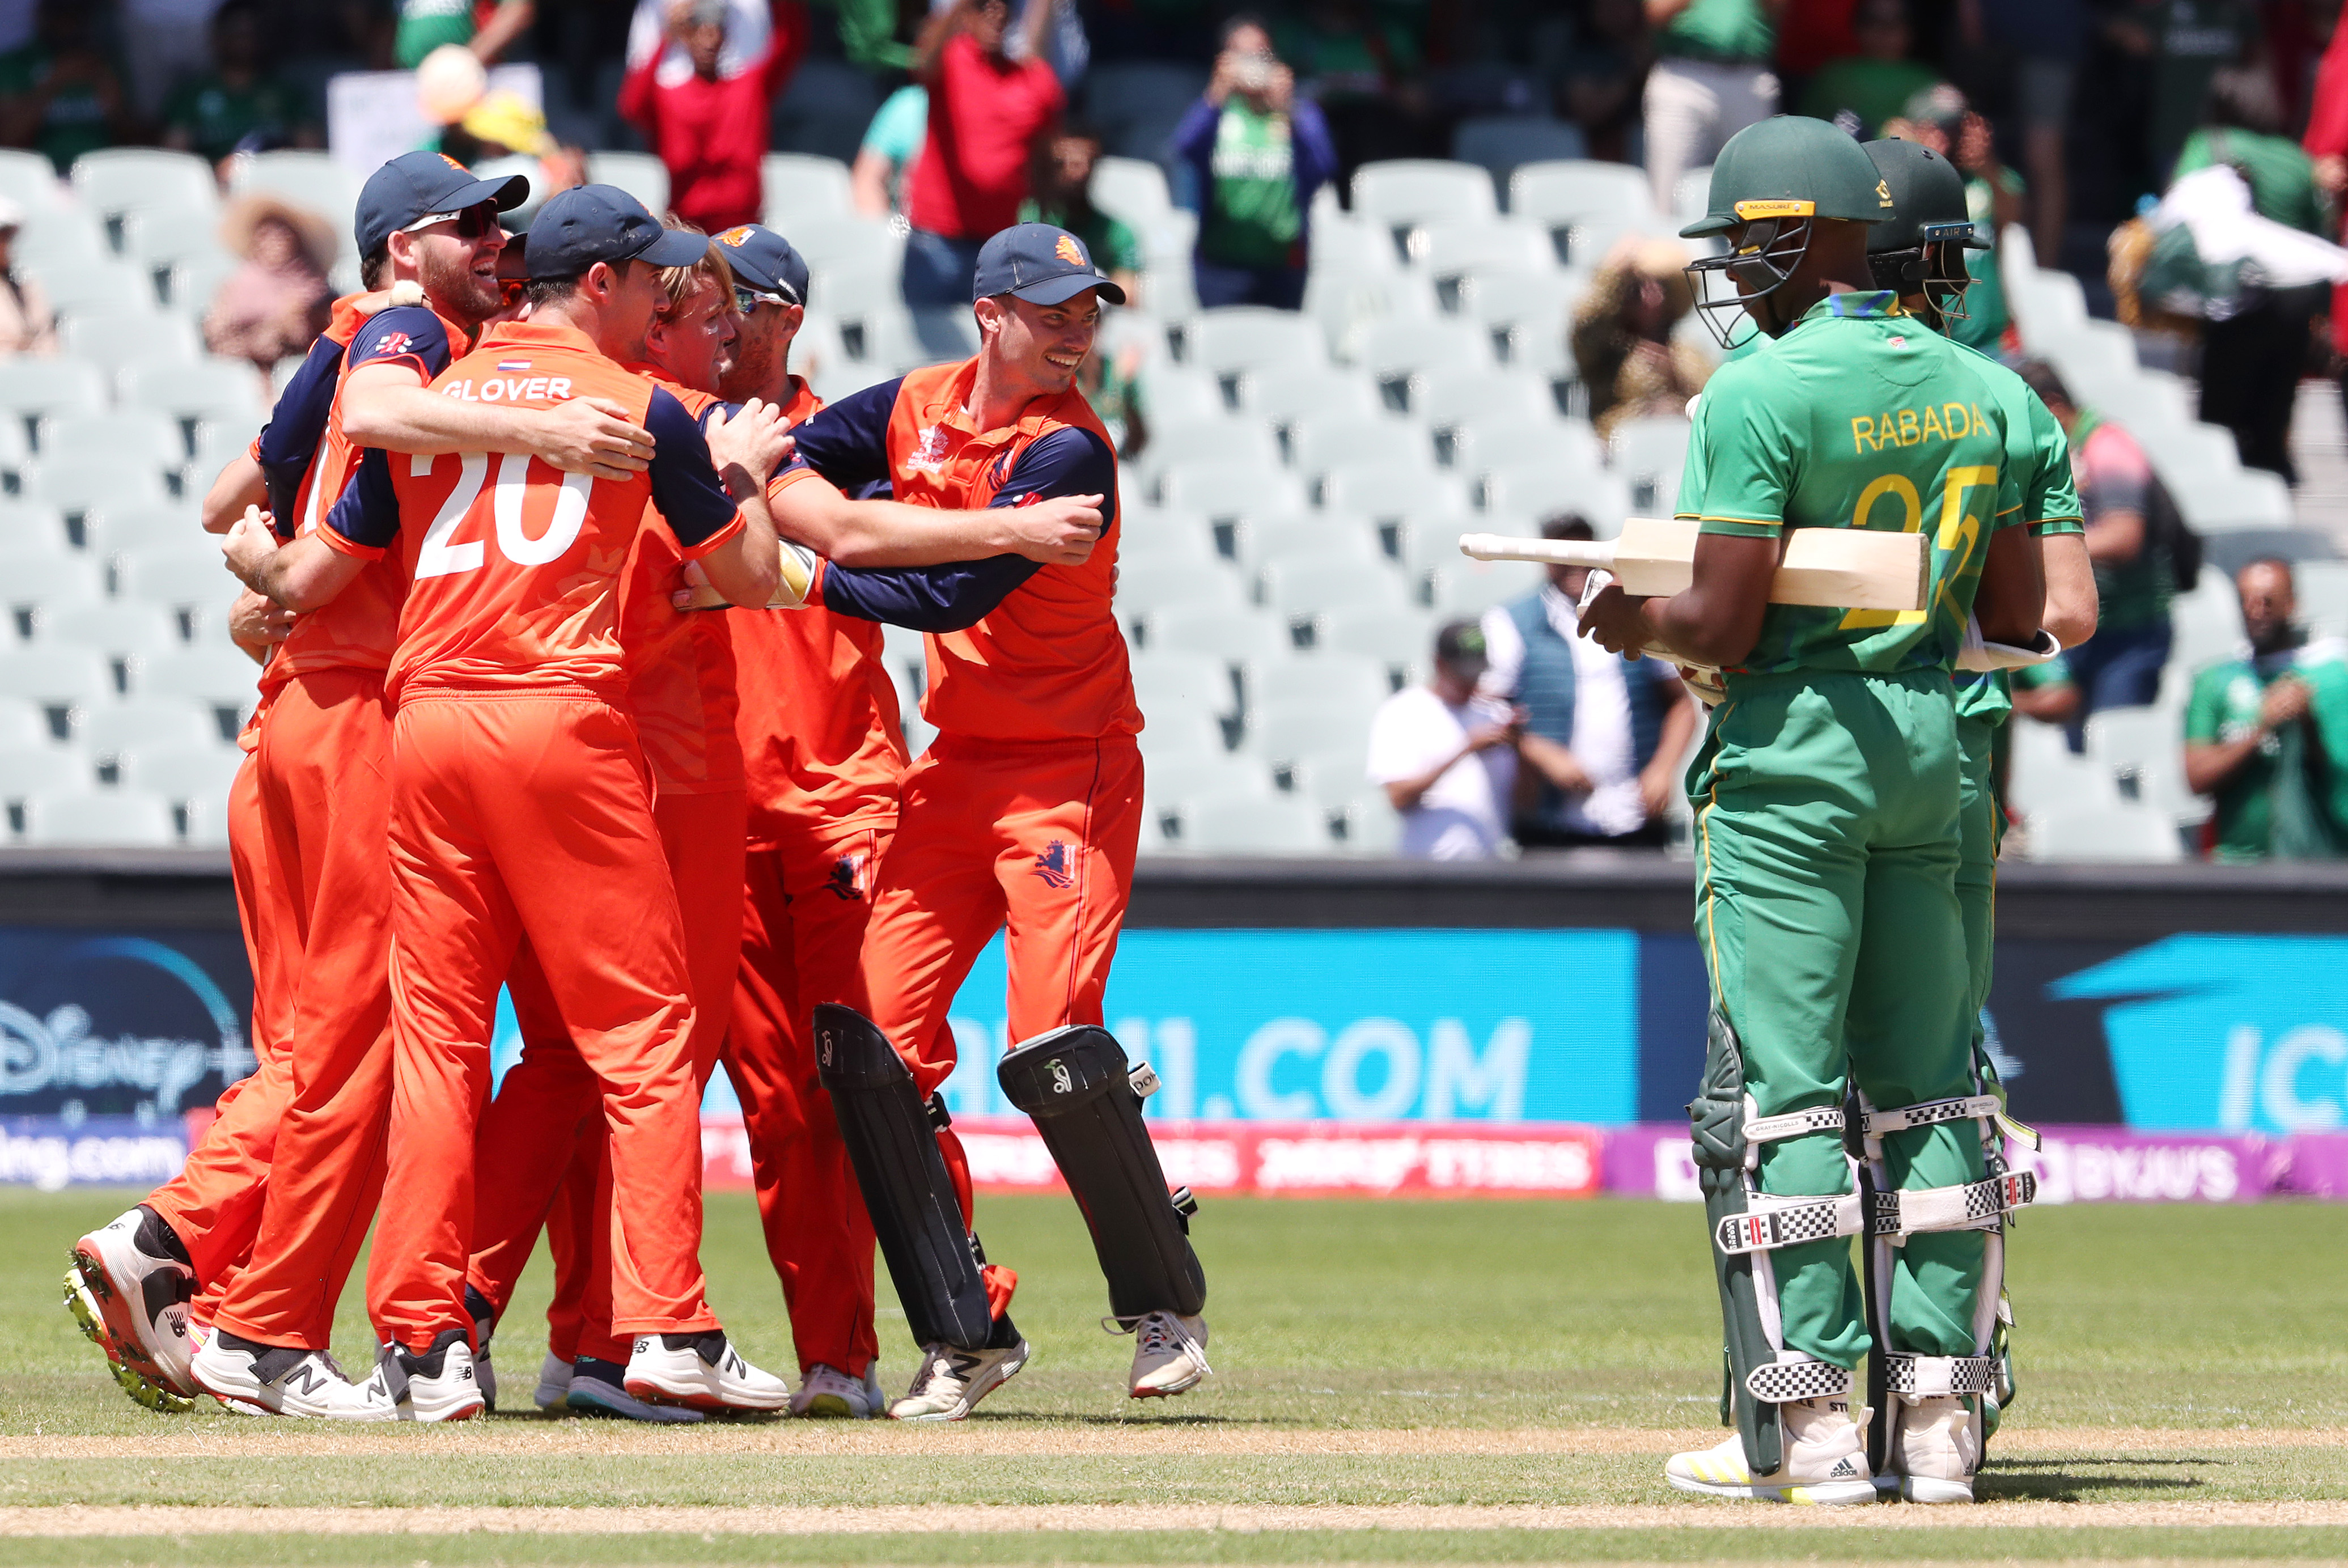 Netherlands players celebrate the win during the ICC Men's T20 World Cup match against South Africa at the Adelaide Oval.